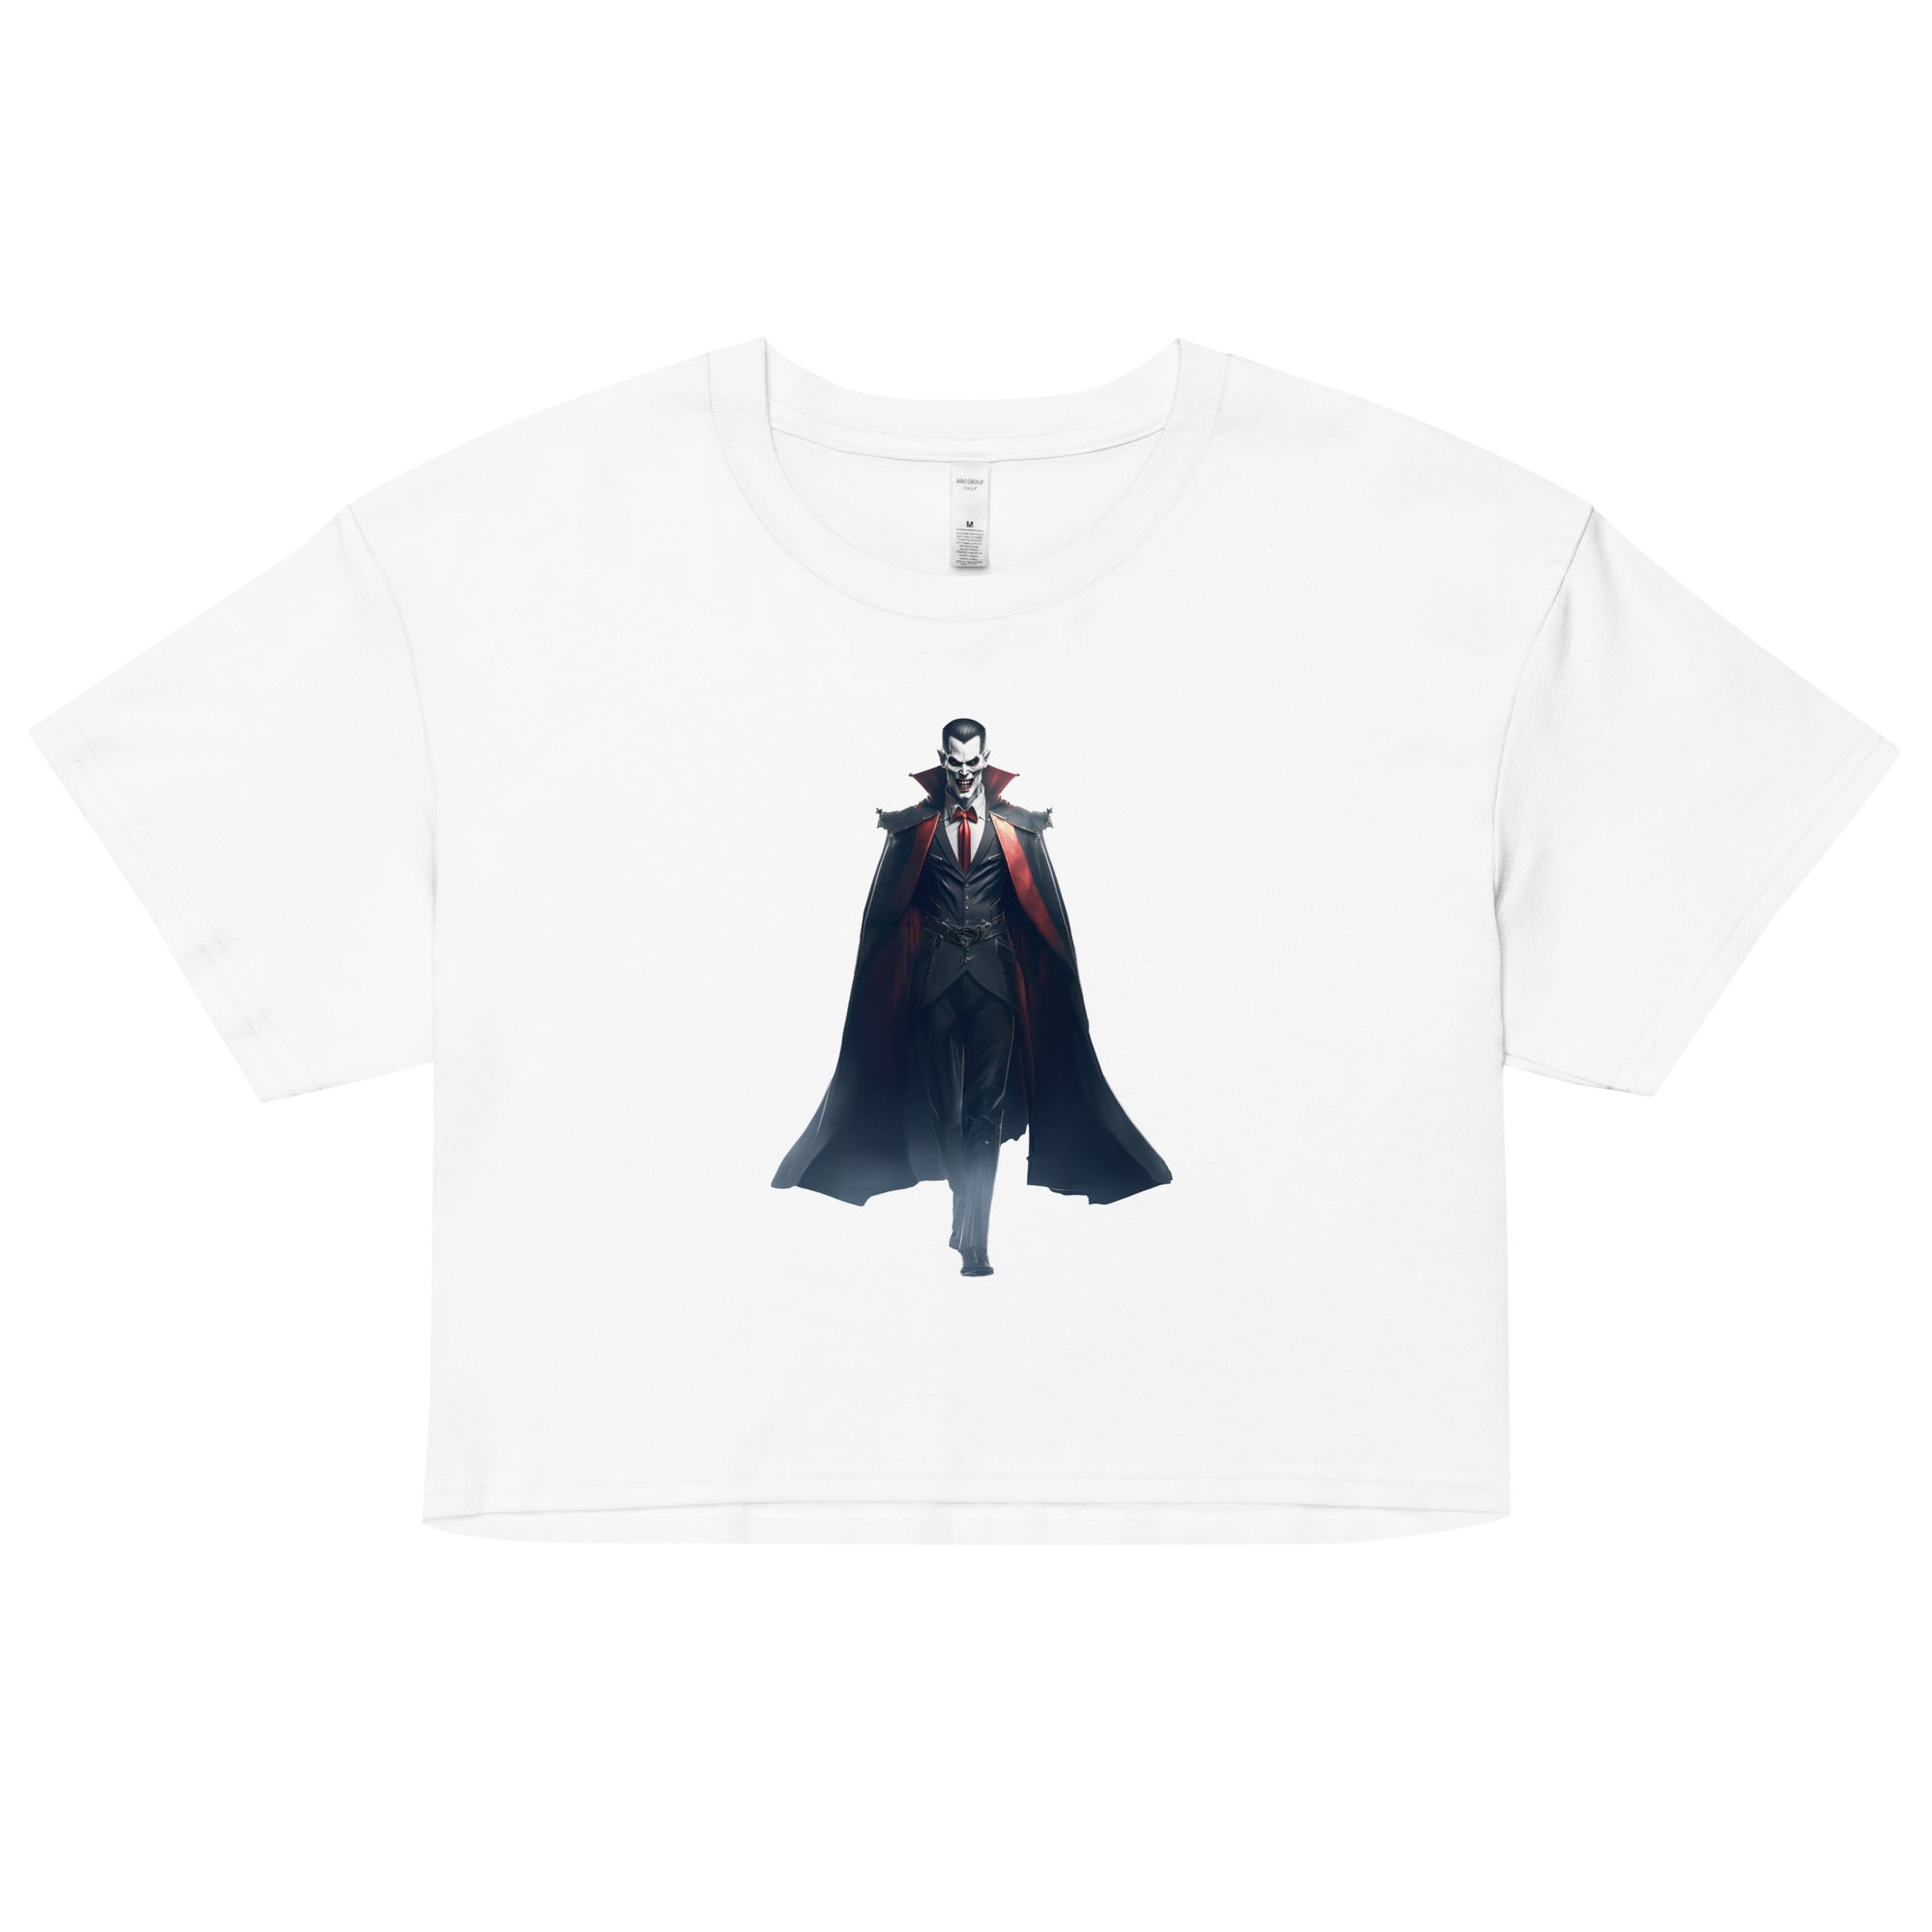 The Monster Squad "Dracula" Women’s crop top